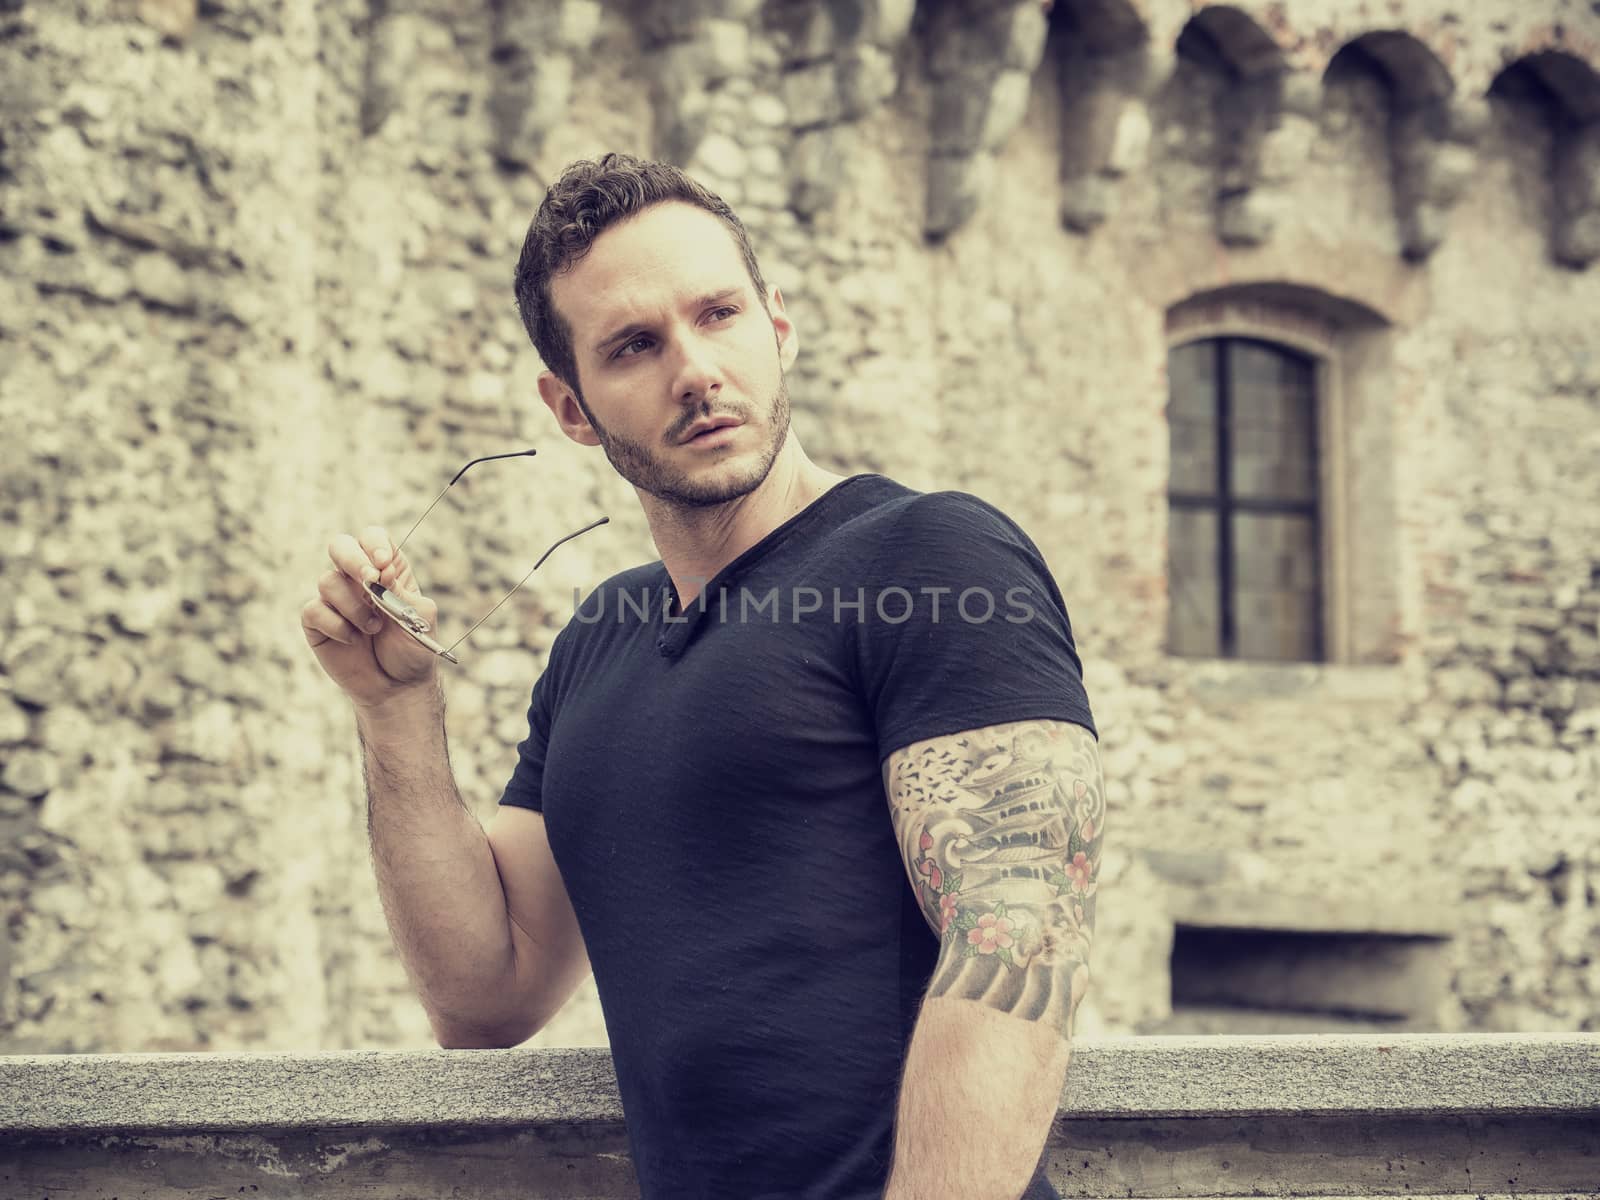 Attractive man outdoor in old European castle, in Switzerland. Athletic build, with tight t-shirt and sunglasses